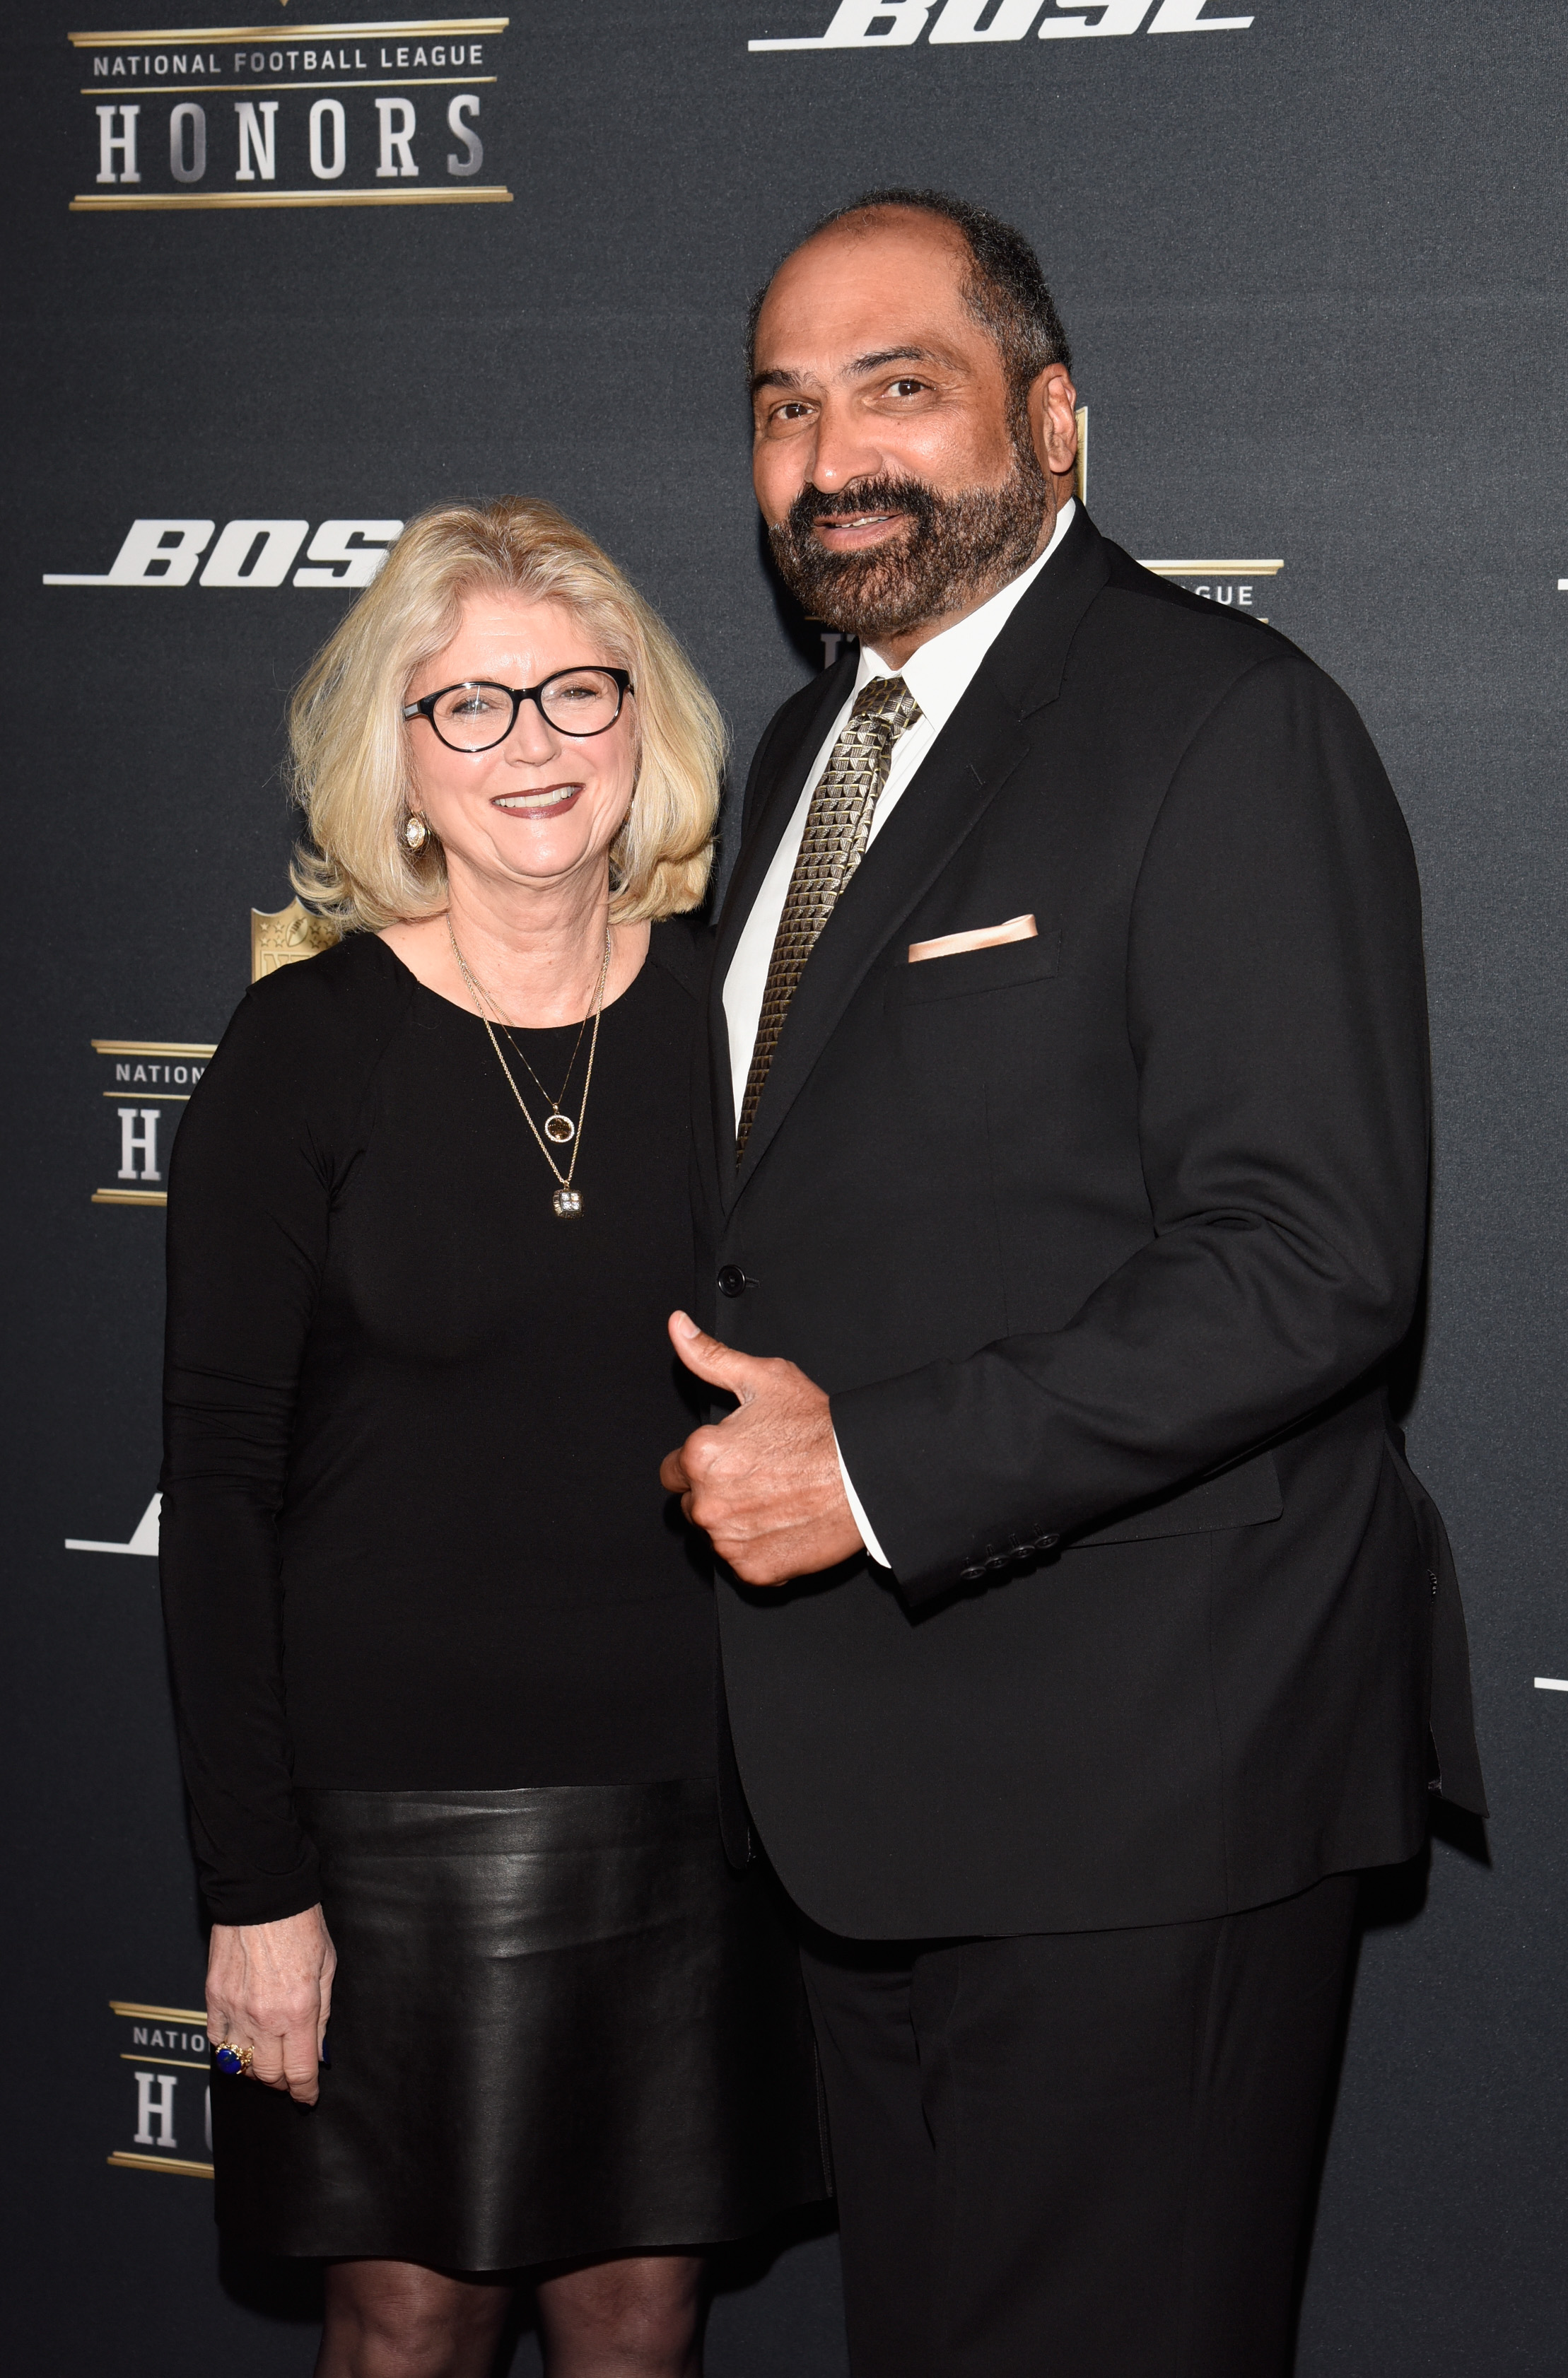 Dana Dokmanovich and Franco Harris attend the 5th Annual NFL Honors at Bill Graham Civic Auditorium on February 6, 2016, in San Francisco, California. | Source: Getty Images